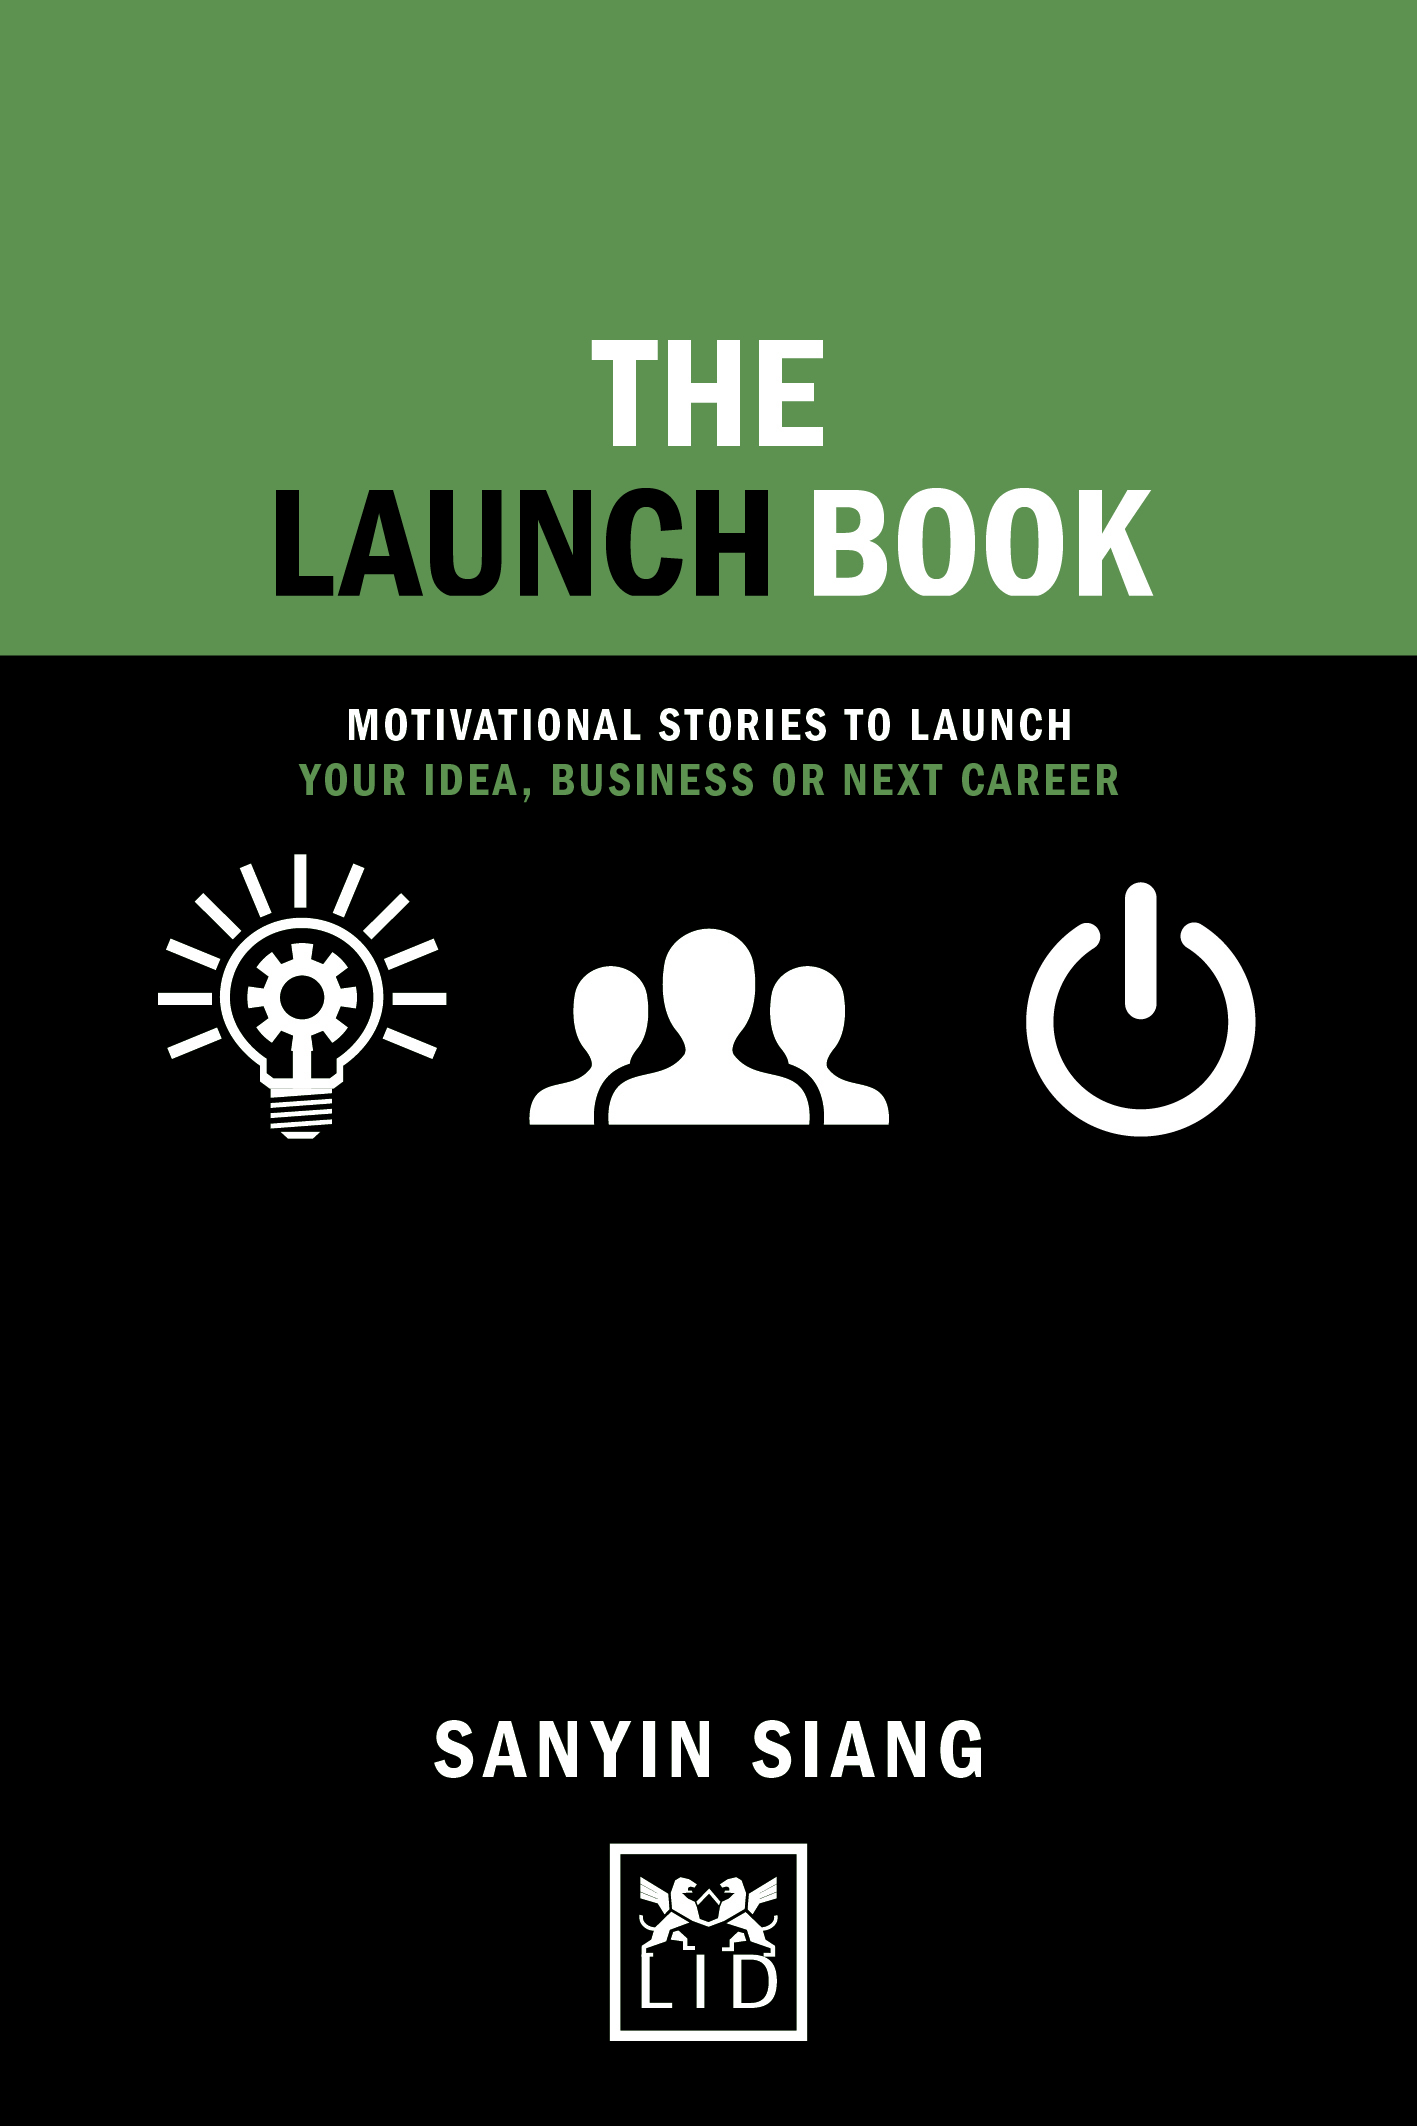 "The Launch Book" by Sanyin Siang